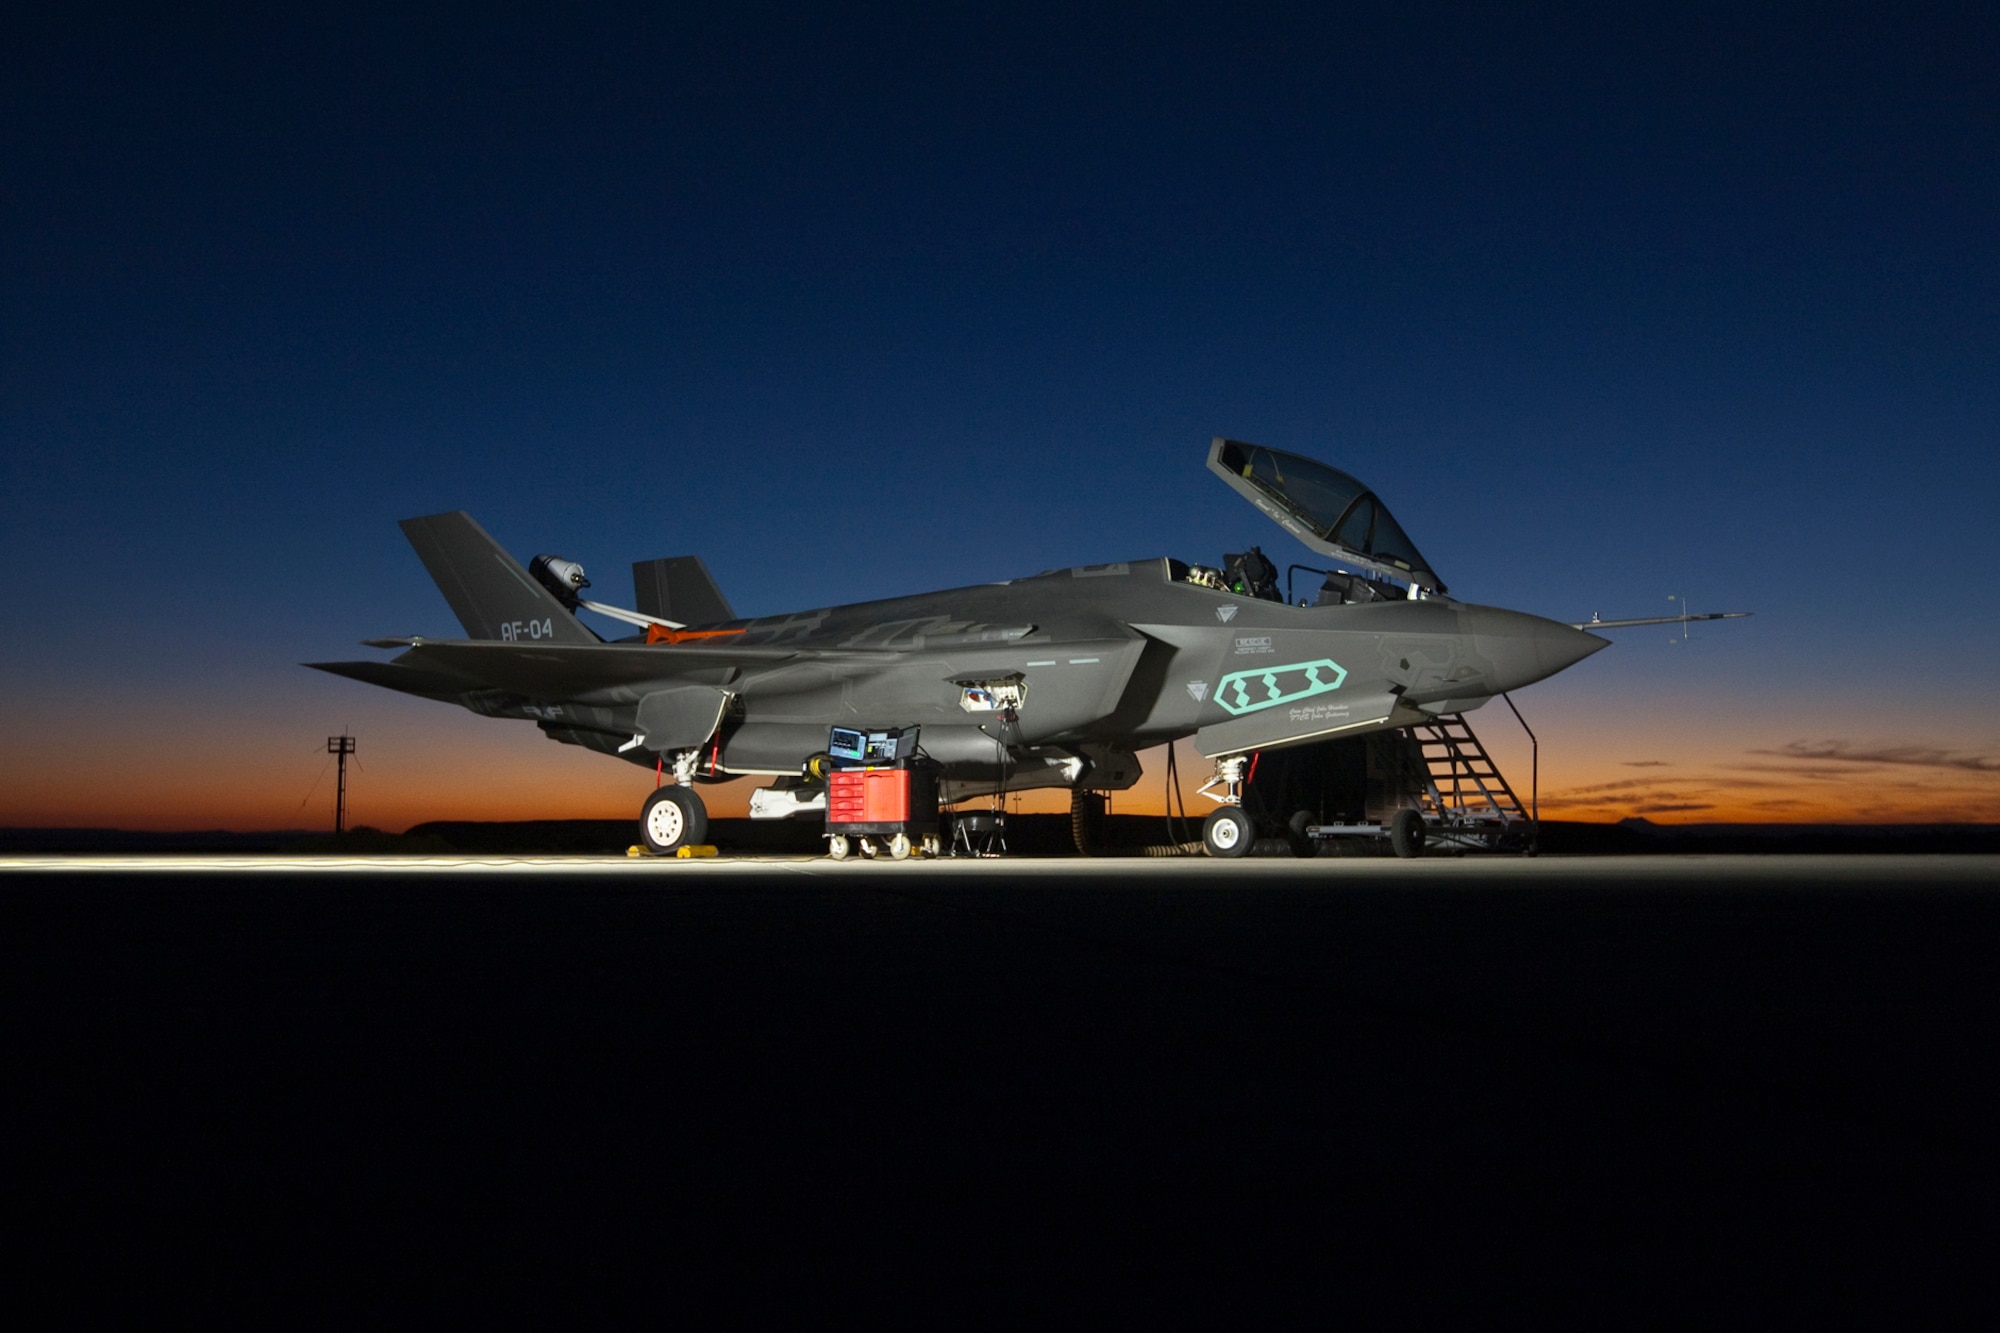 The F-35A, AF-4, can be seen outfitted with a spin recovery chute (SRC) during High Angle of Attack testing accomplished by the F-35 Integrated Test Force team at Edwards Air Force Base, Calif. (Photo by Darin Russell/Lockheed Martin)